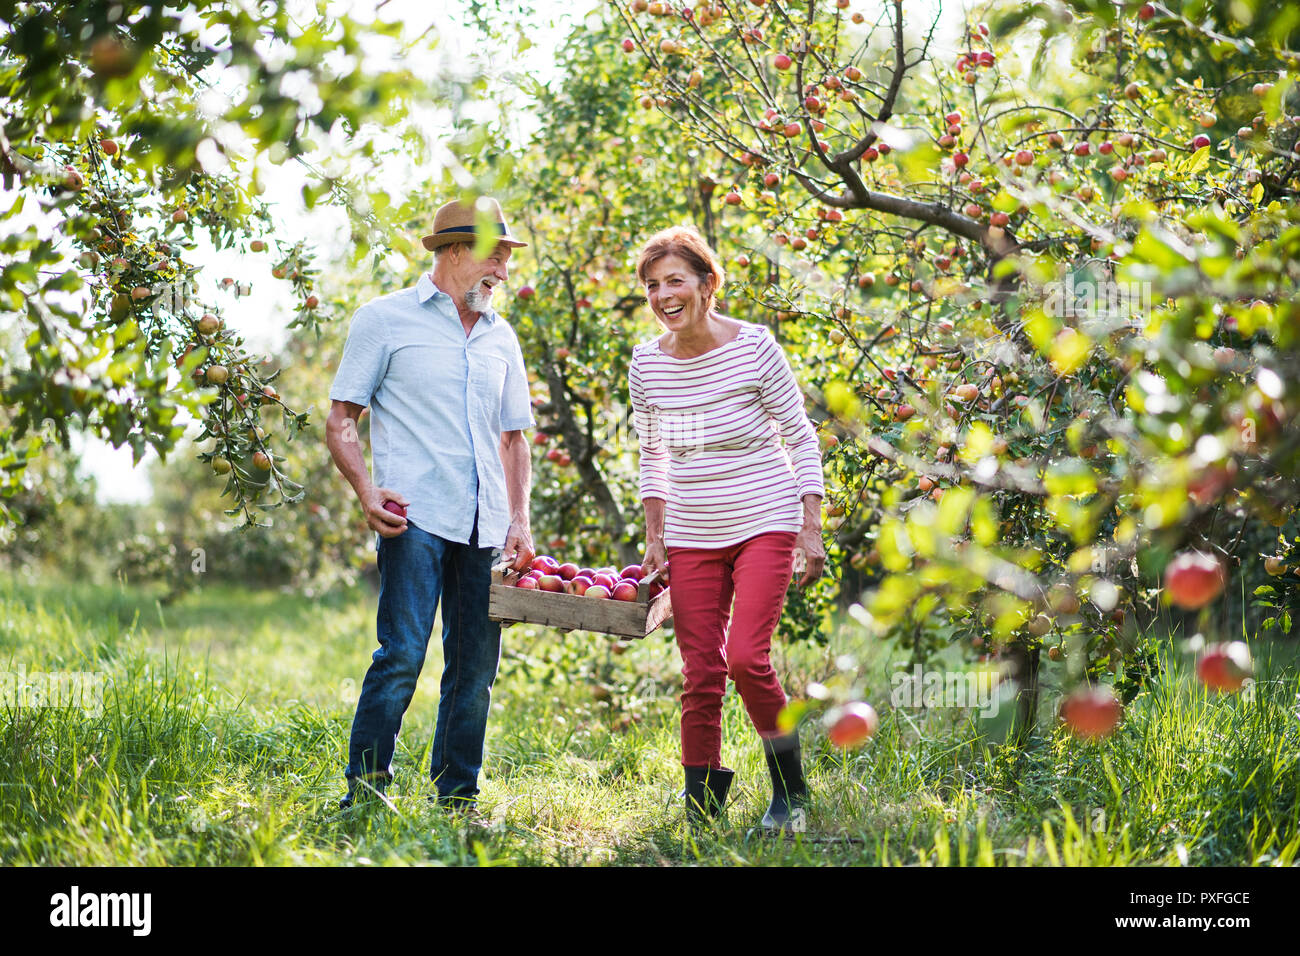 A laughing senior couple carrying a wooden box full of apples in orchard in autumn. Stock Photo